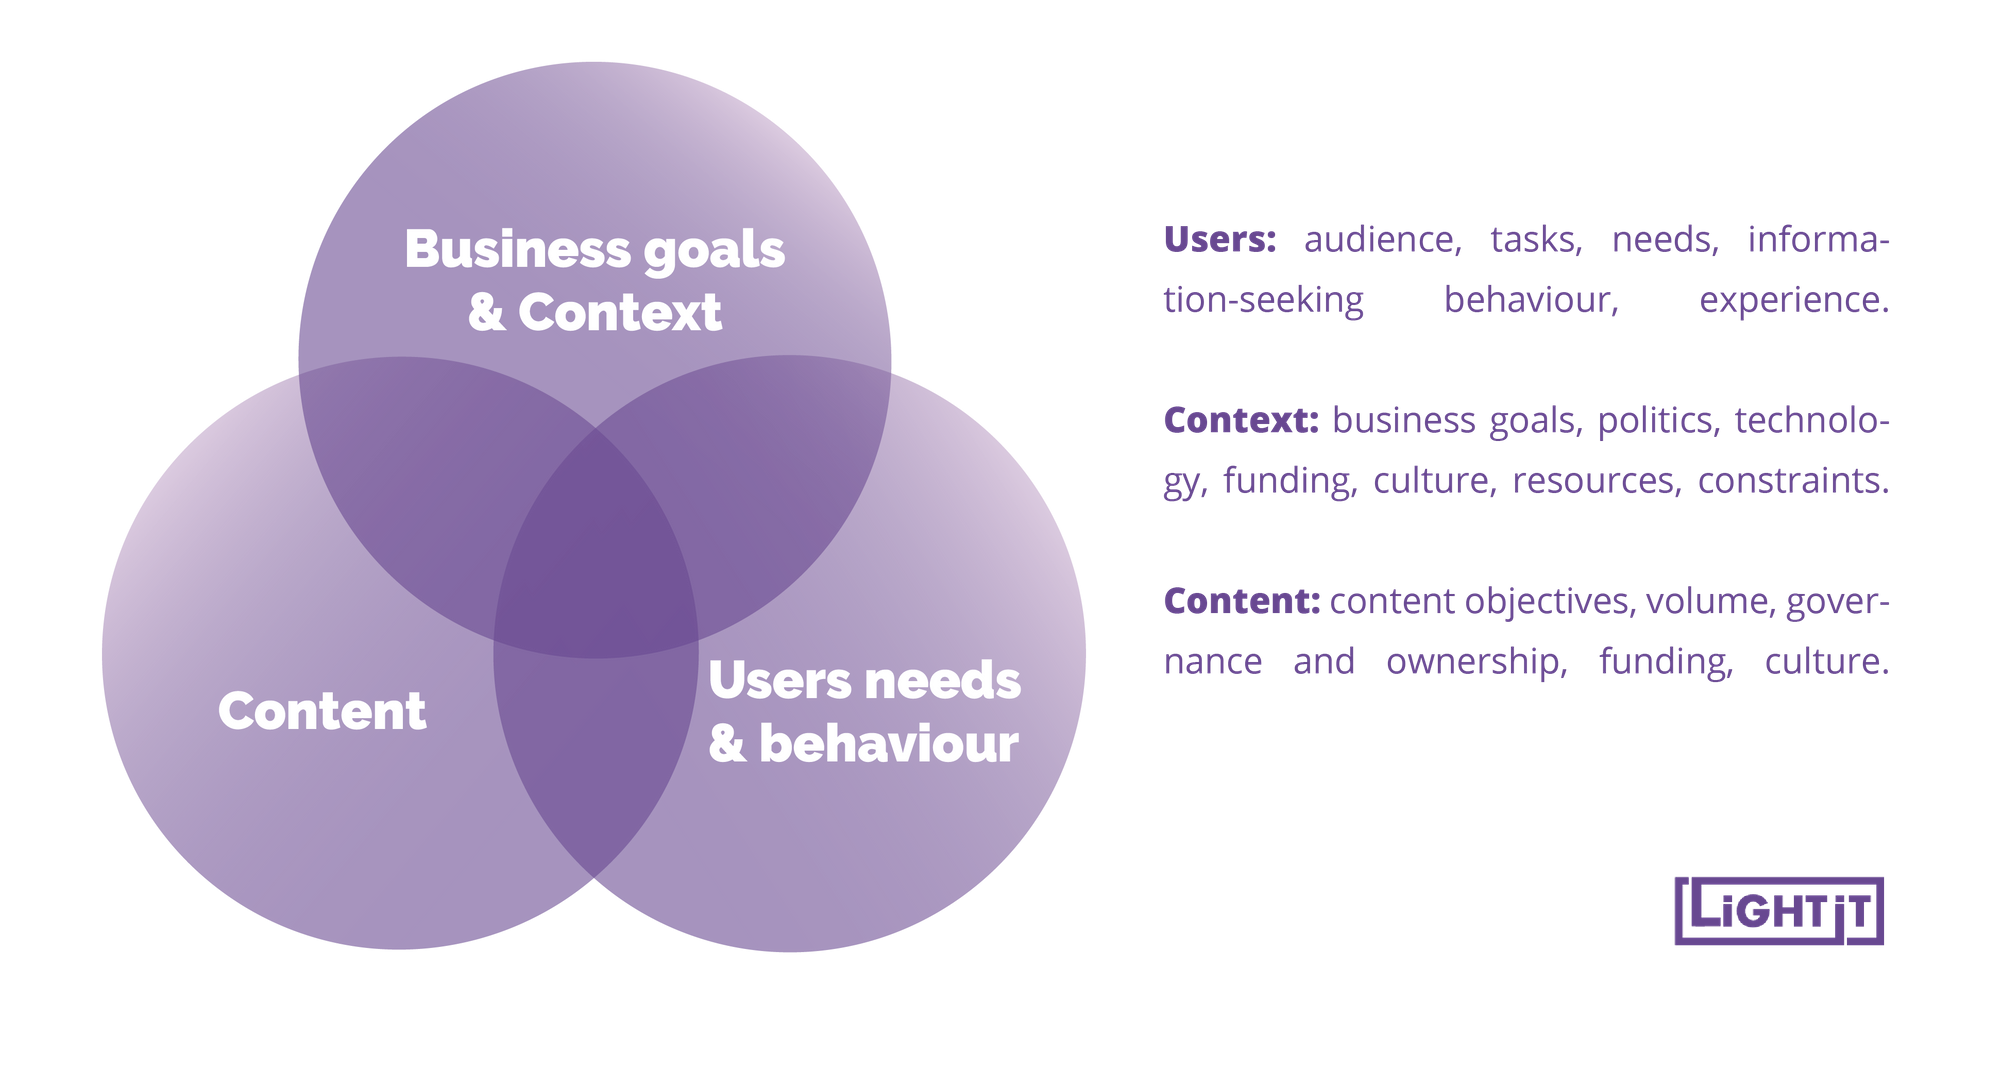 A diagram of business goals, content and users needs & behaviours.